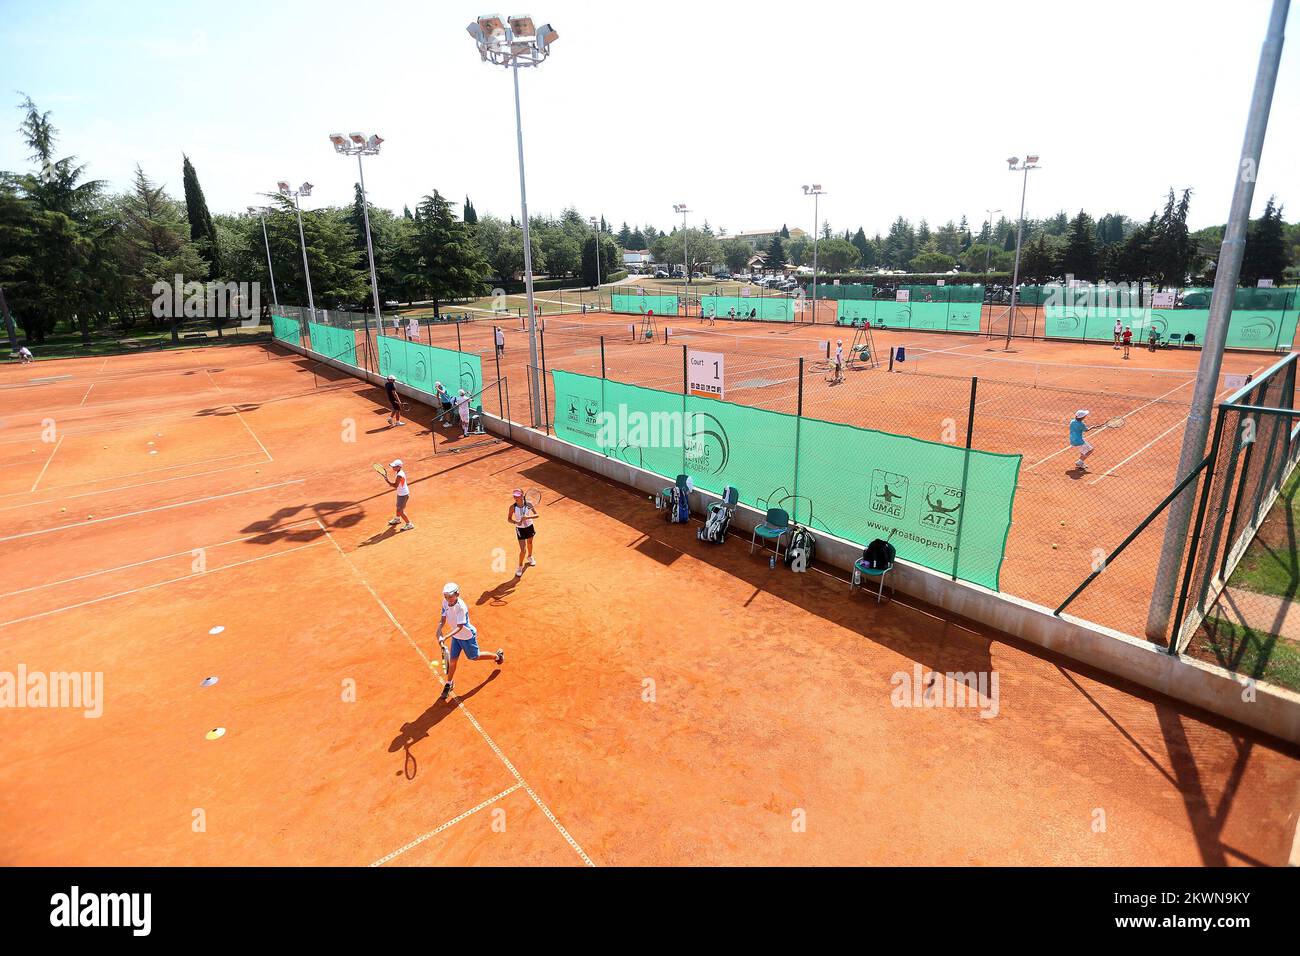 07/23/2013., Umag - Umag inauguration Tennis Academy was attended by tennis  players and Alexandr Dolgopolov, Andreas Seppi, and Richard Gasquet. Photo:  Slavko Midzor / PIXSELL Stock Photo - Alamy